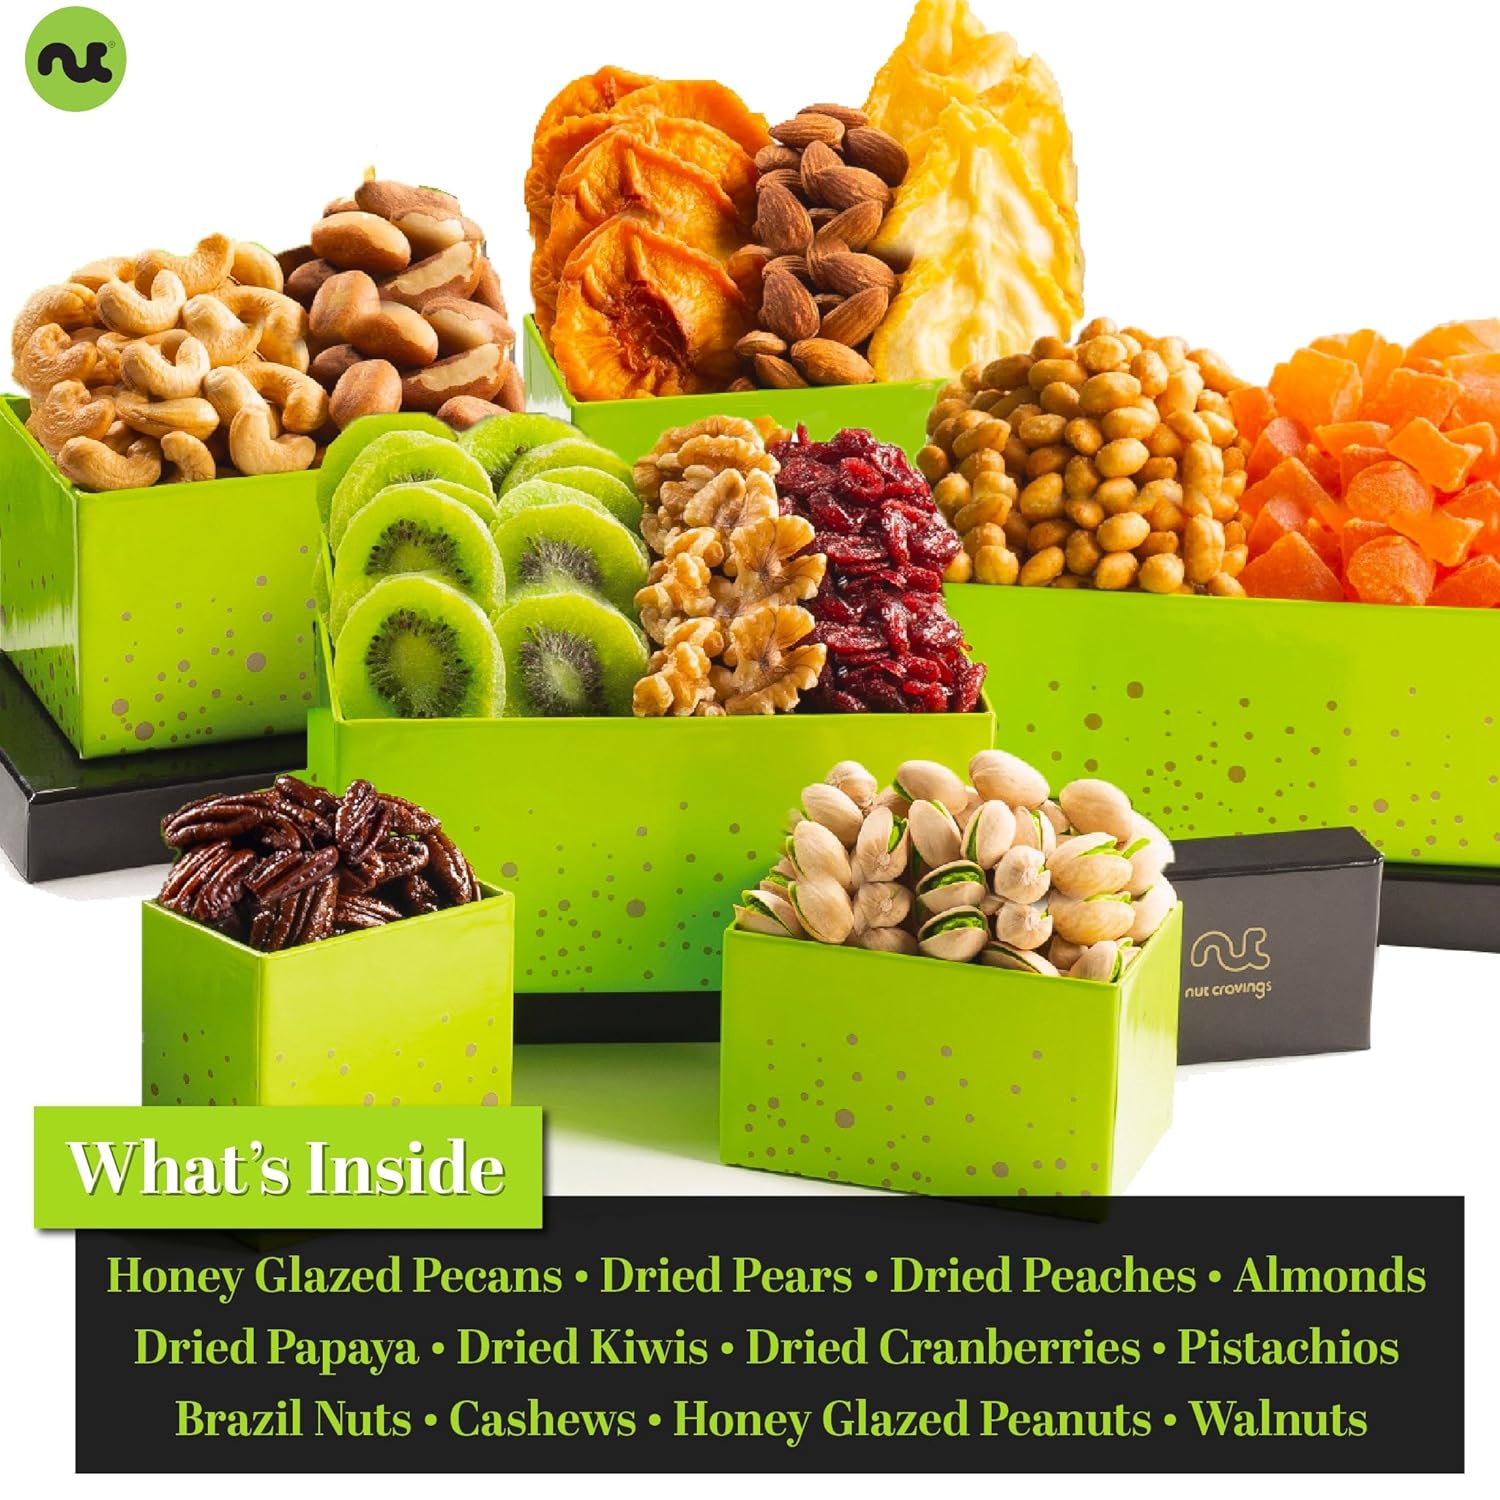 Nut Cravings Gourmet Collection - Mothers Day Dried Fruit & Mixed Nuts Gift Basket Green Tower + Ribbon (12 Assortments) Arrangement Platter, Birthday Care Package - Healthy Kosher : Grocery & Gourmet Food